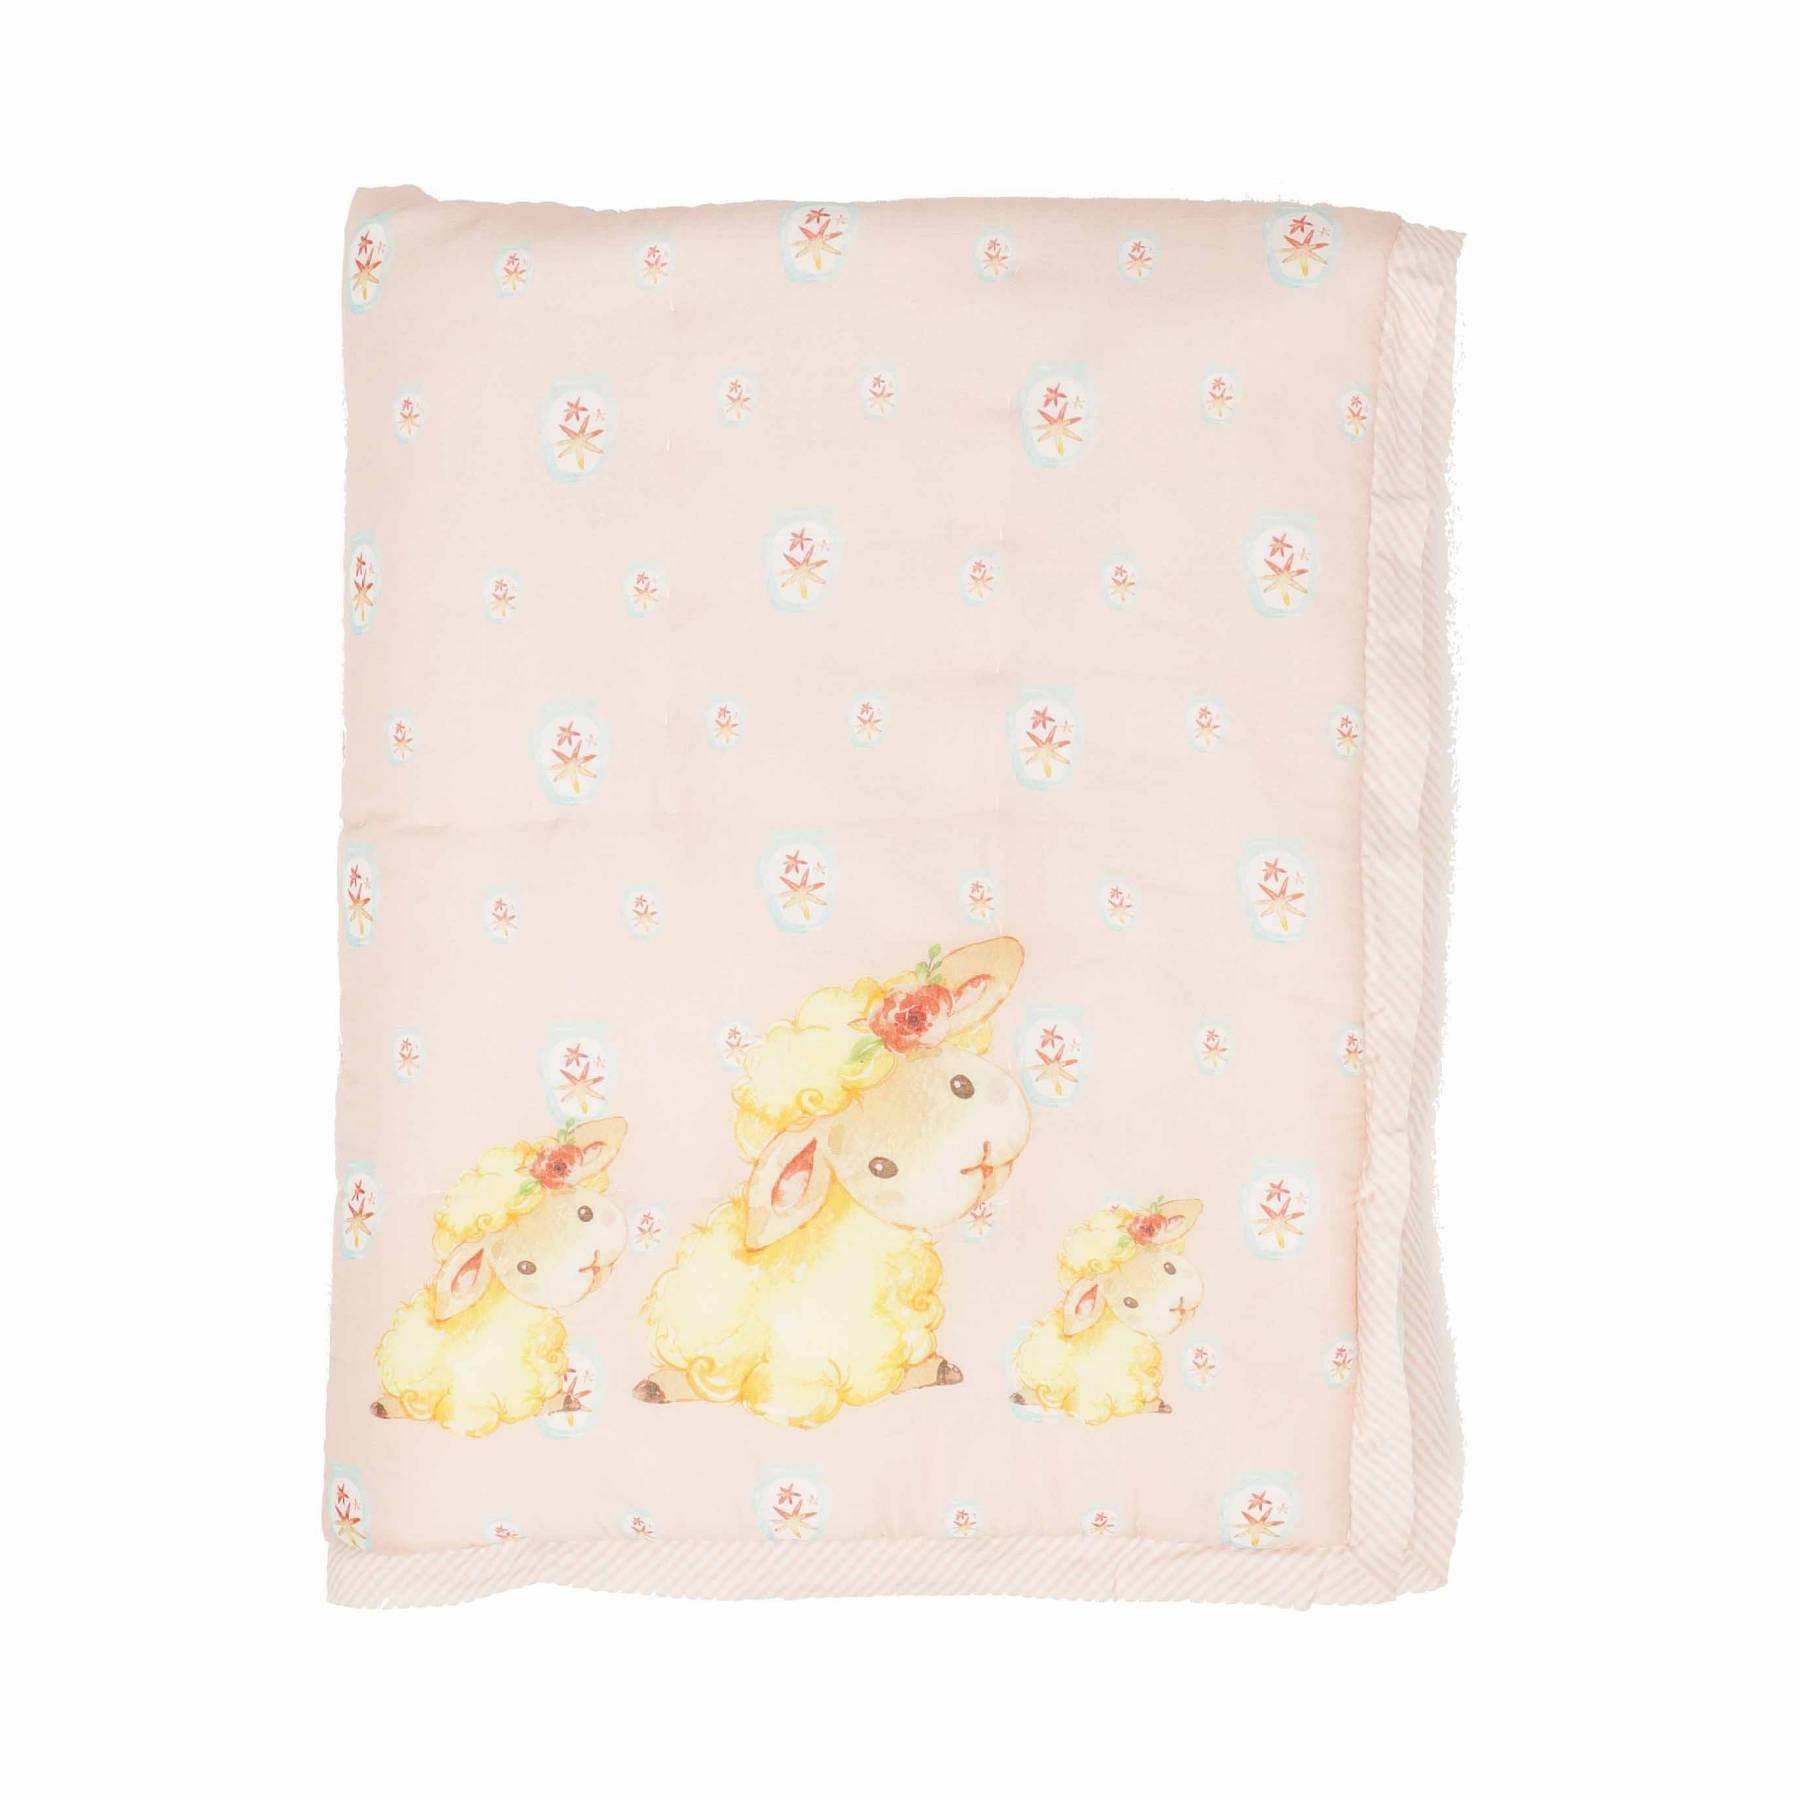 Fluffy the Sheep - Baby Quilt